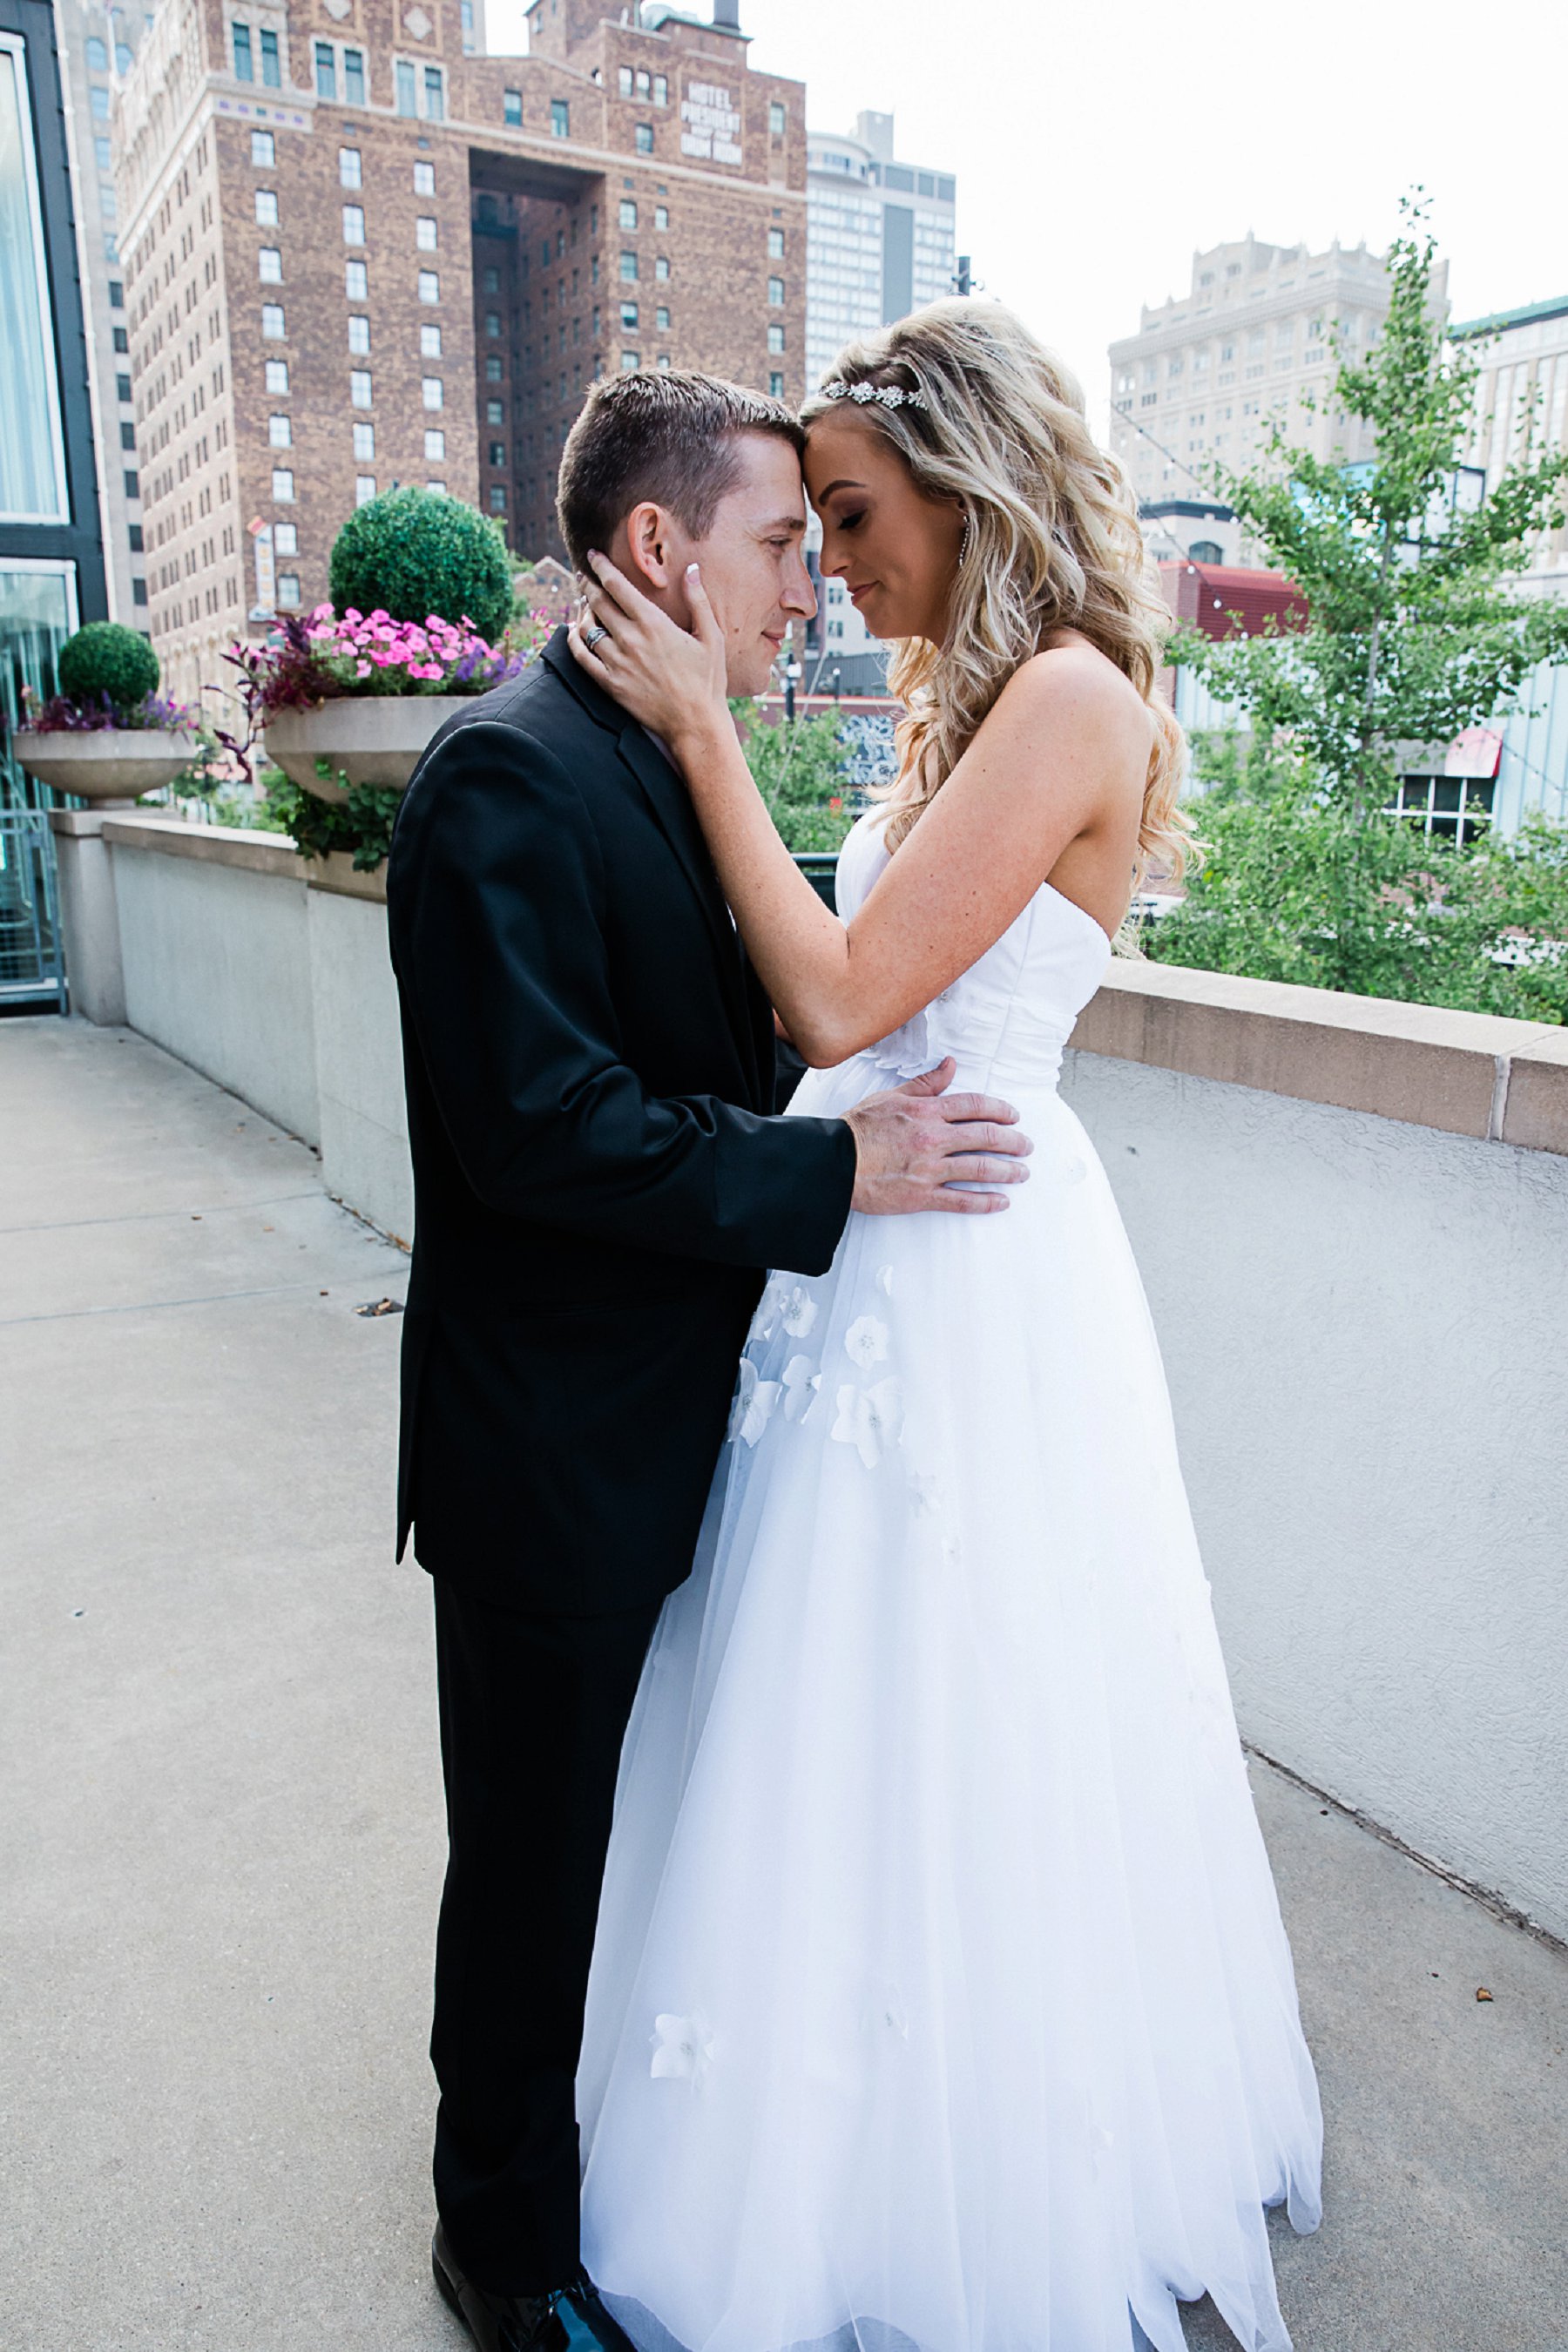 Bride and Groom Wedding Photography by Merry Ohler | Best Midwest Wedding Photographer